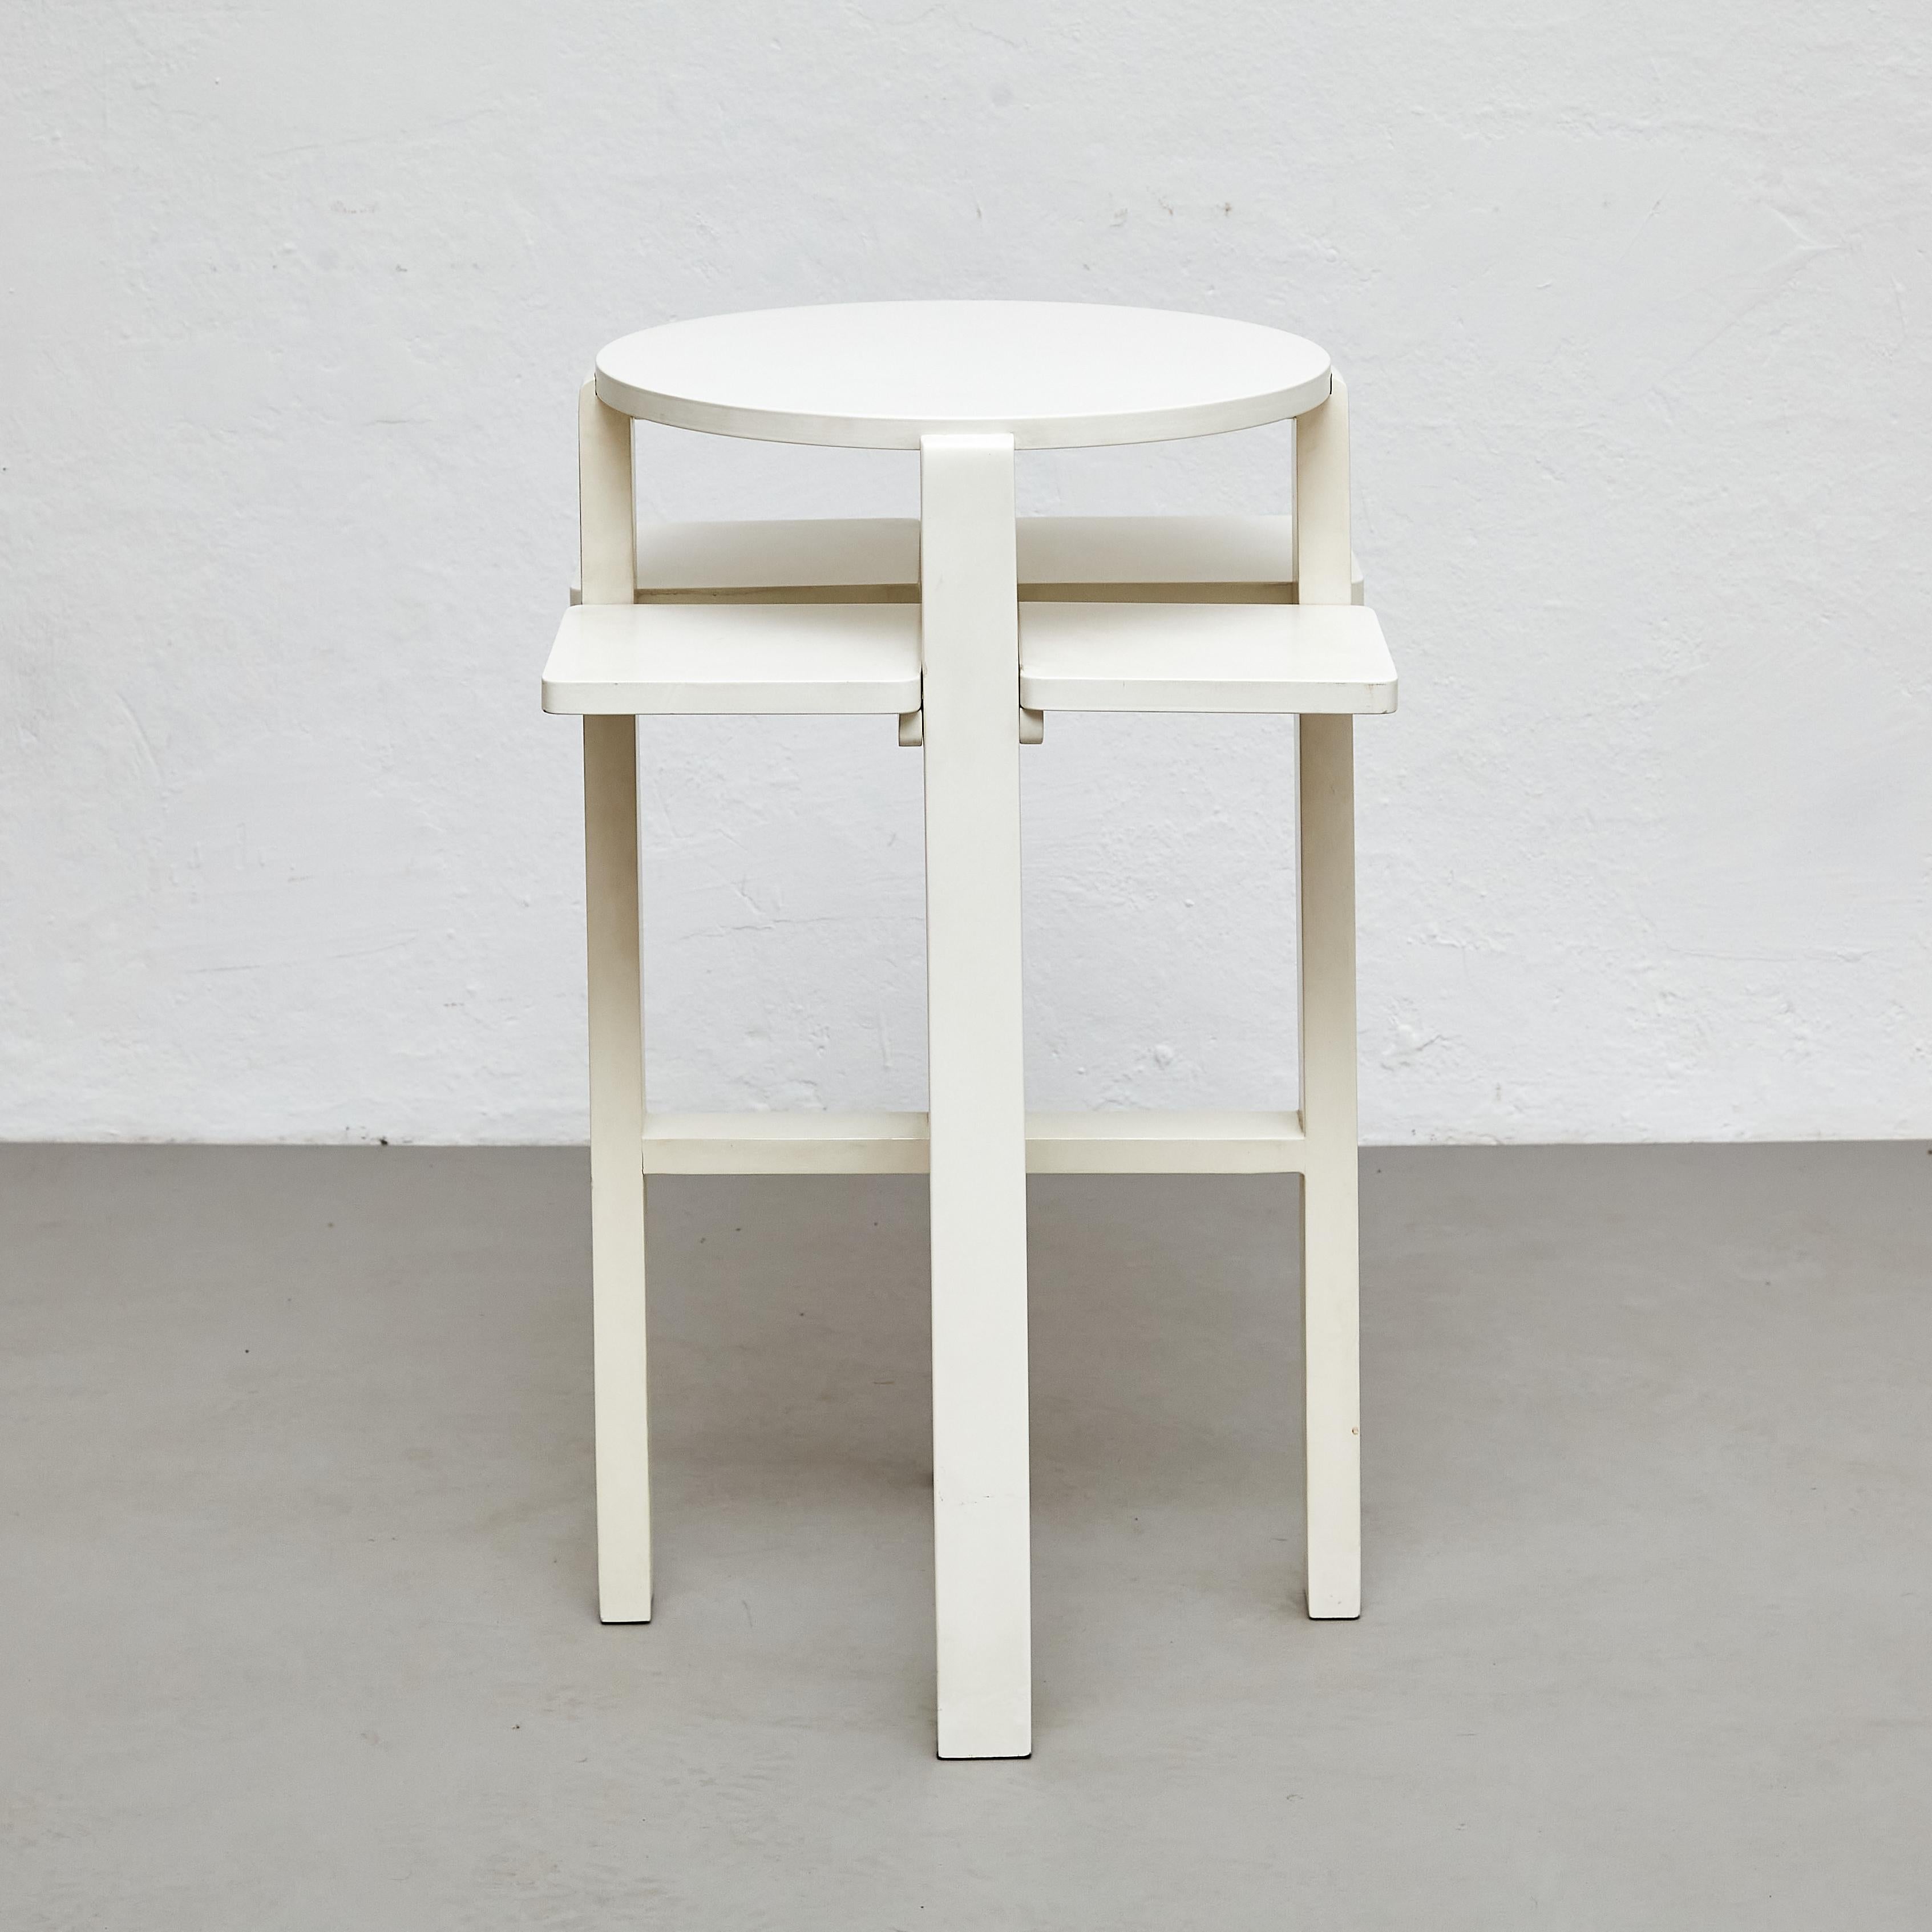 Late 20th Century Charles Rennie Mackintosh White Lacquered Domino Side Table, circa 1970